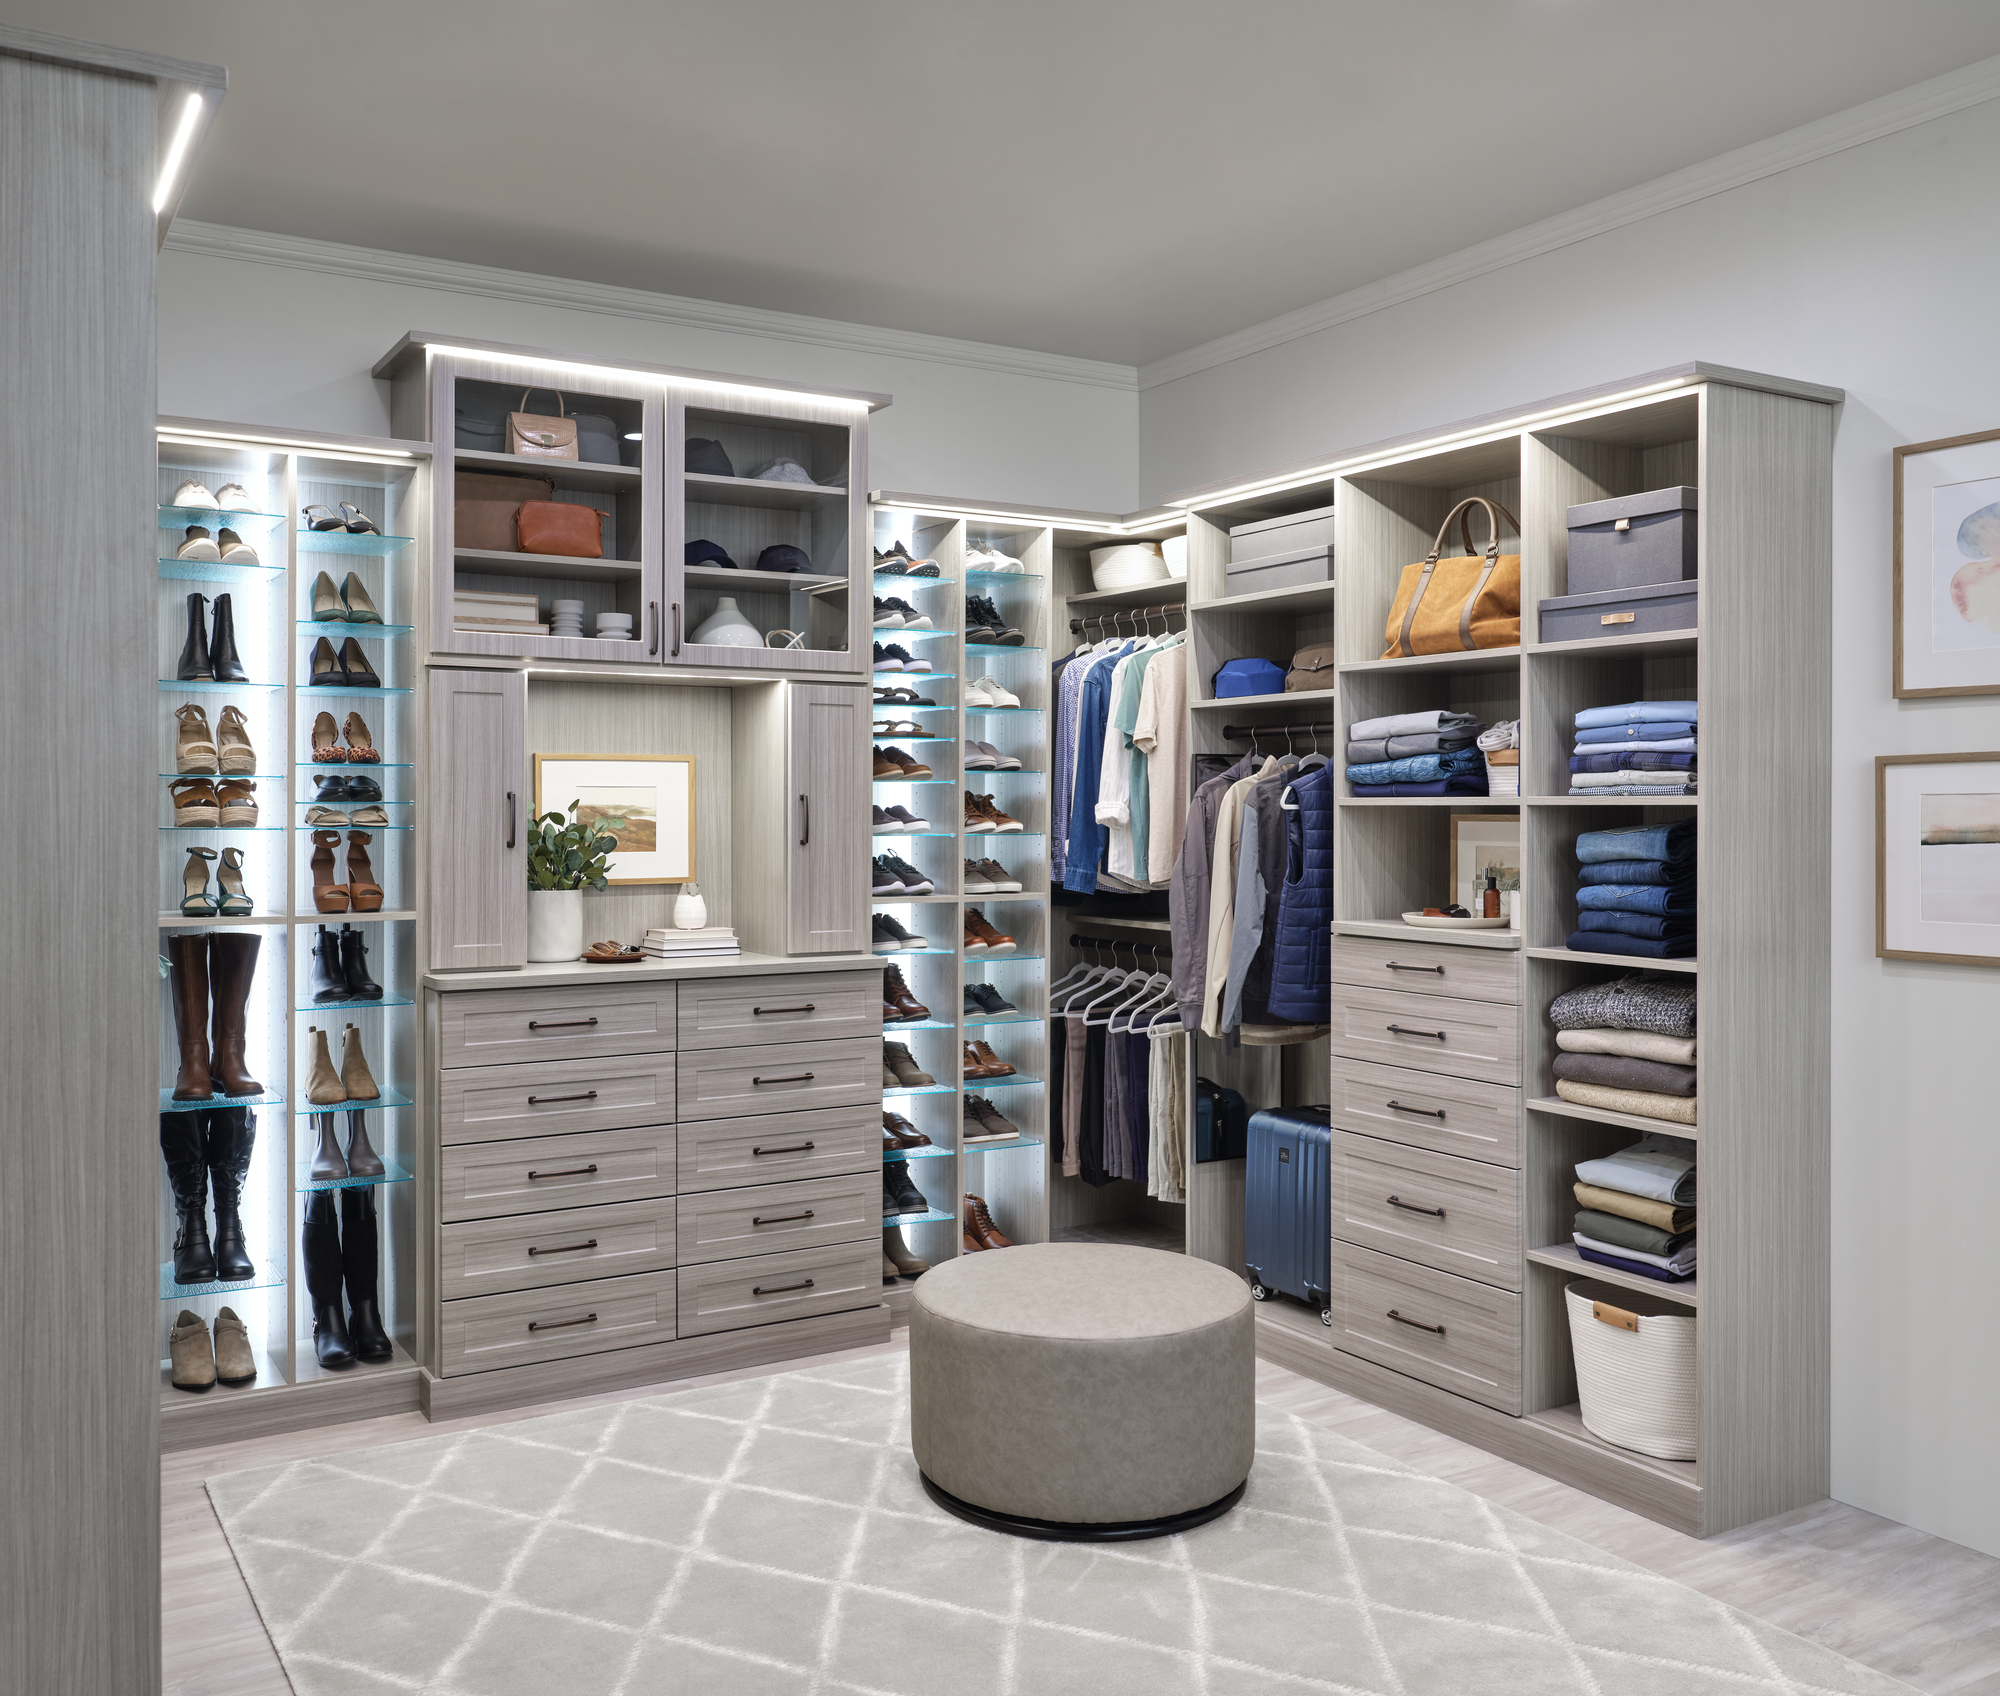 Large custom closet with custom lighting, drawers and adjustable shoe shelves in timber grey